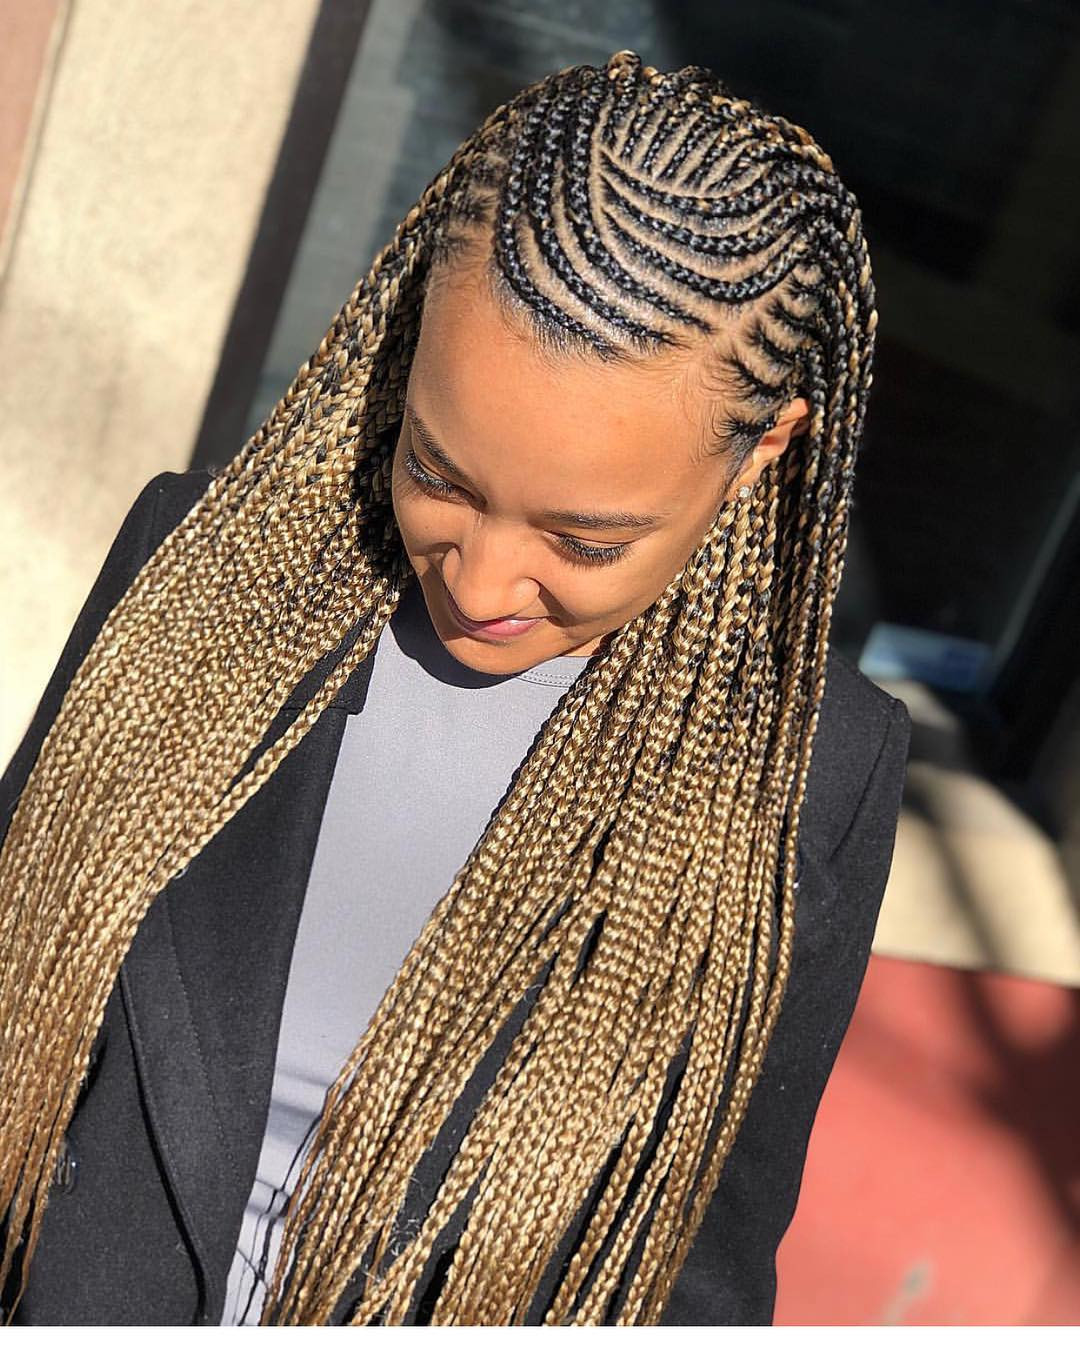 Black Braided Hairstyles 2020
 2020 Braided Hairstyles That Are Totally Hip and Cute